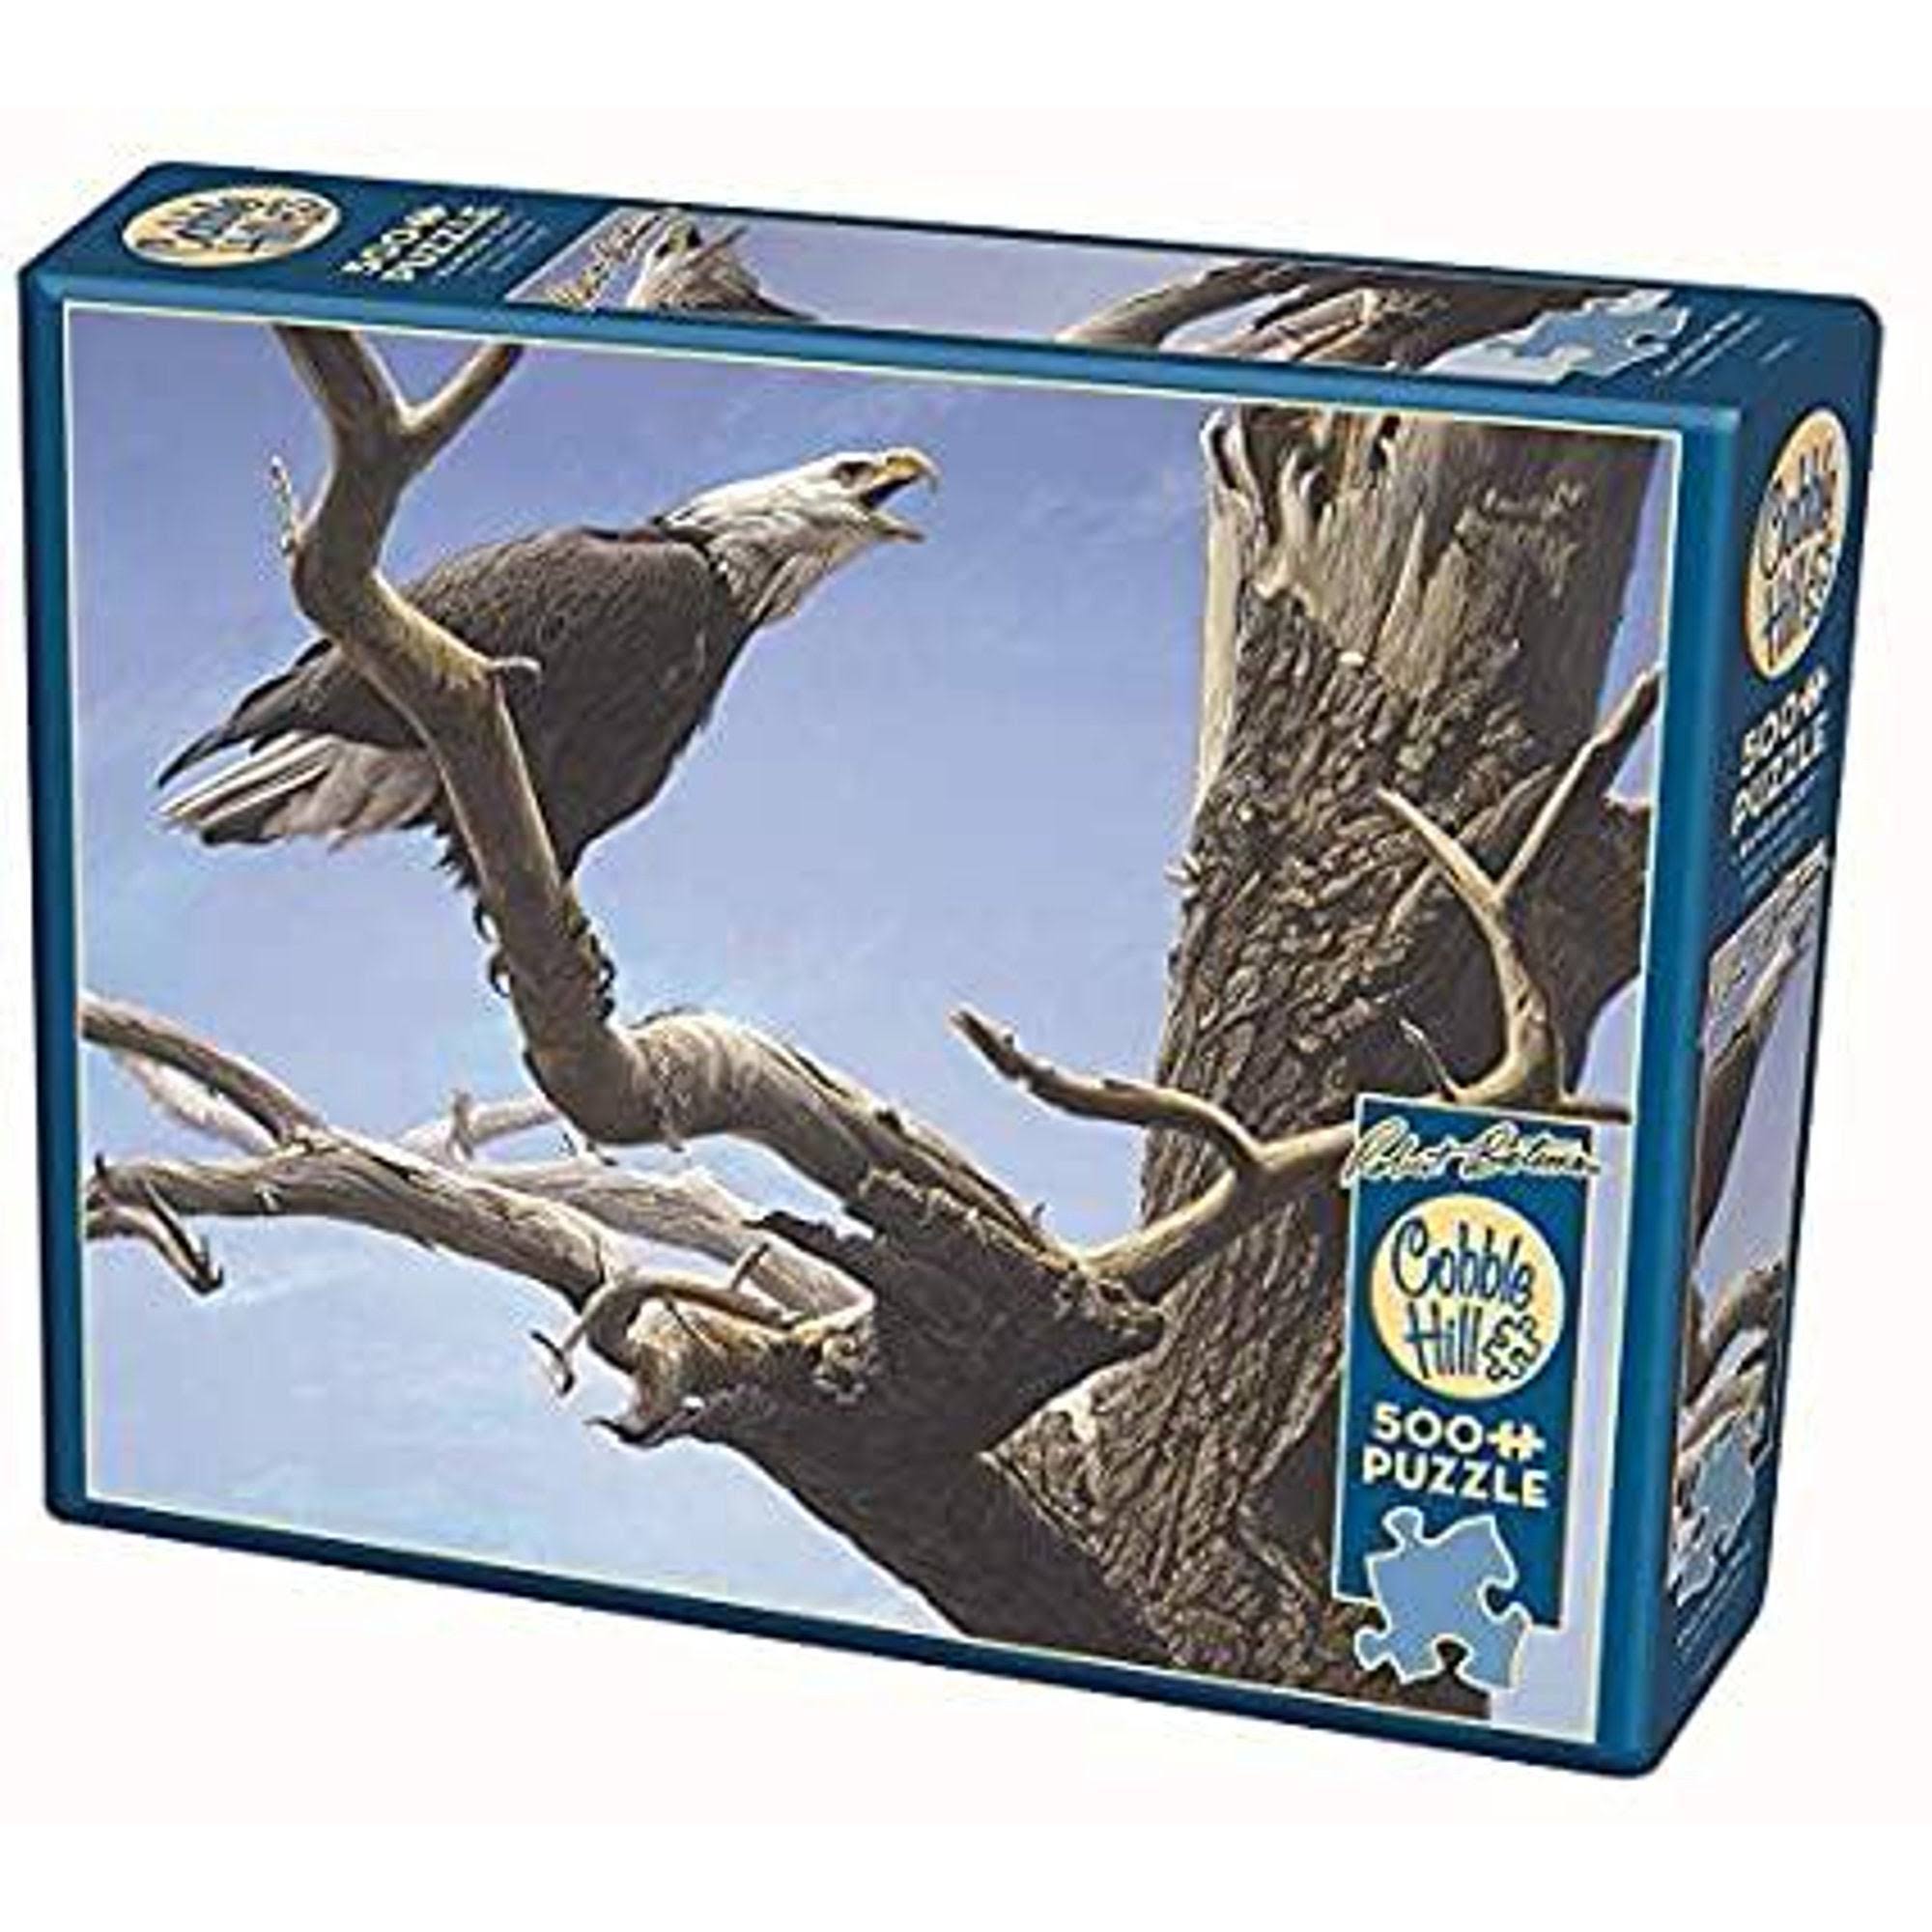 CBL85059 - Cobblehill Puzzles 500 PC - Call of The Wild